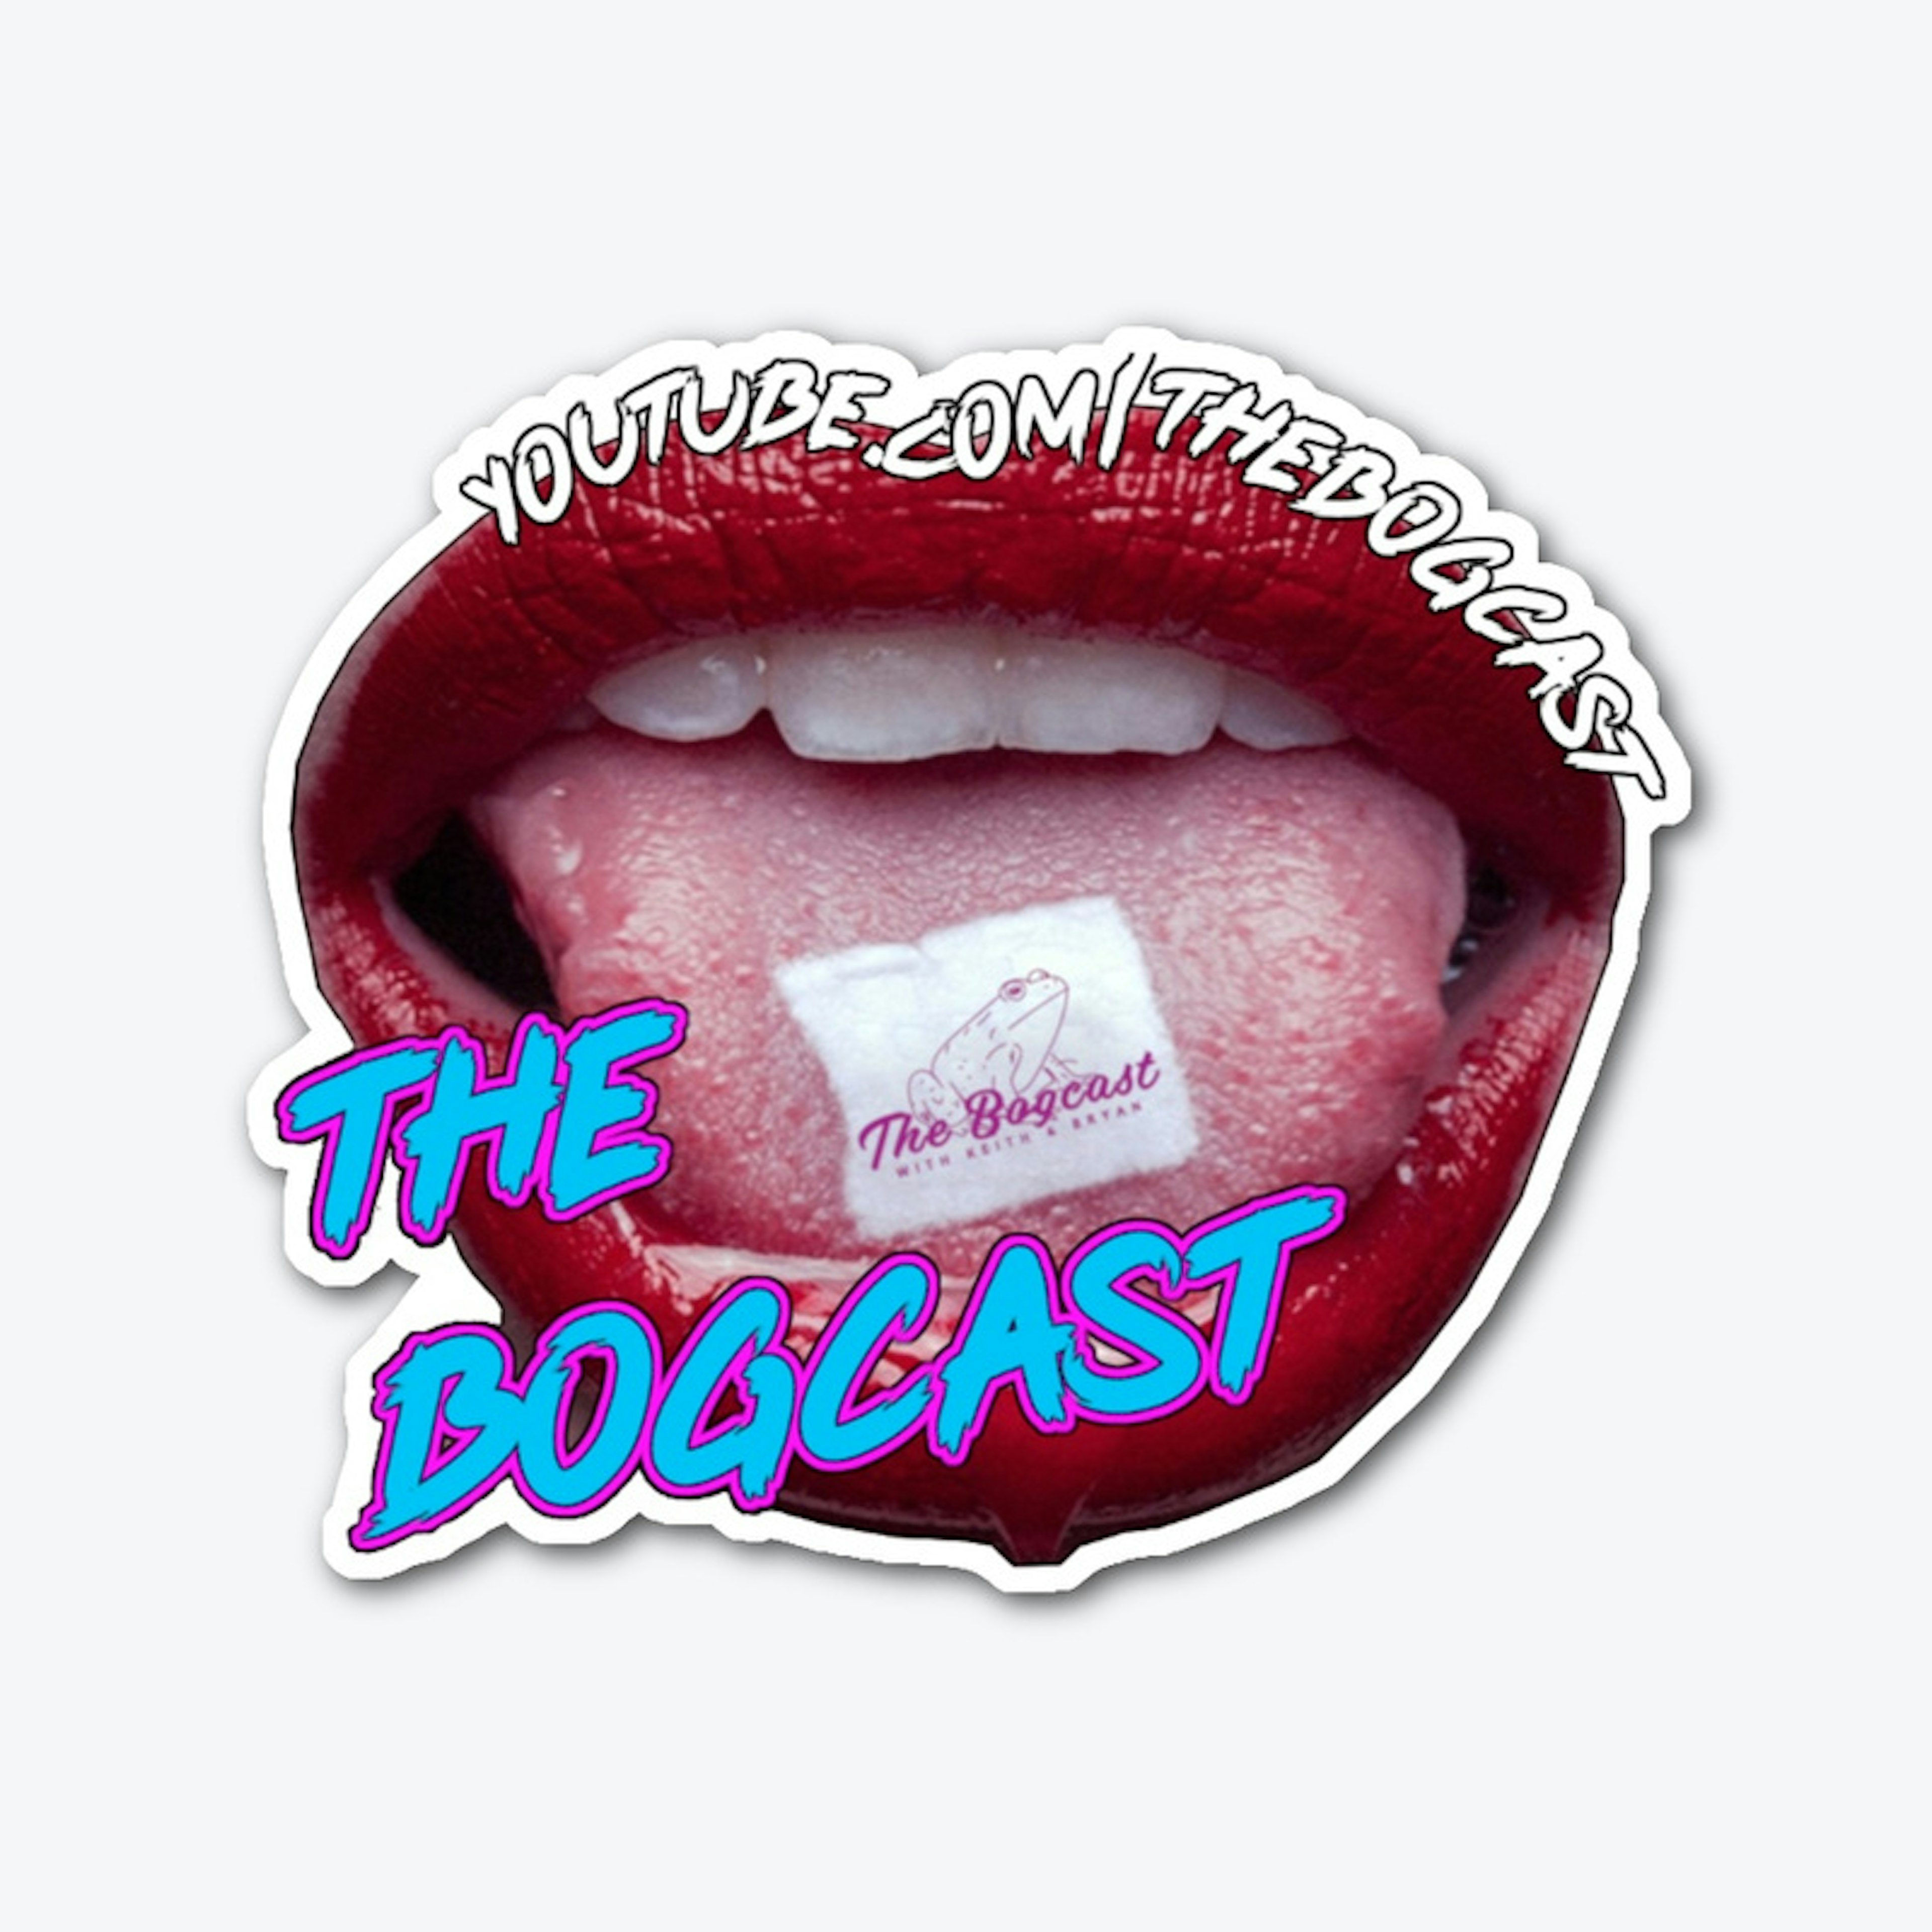 Take a hit of "The Bogcast"